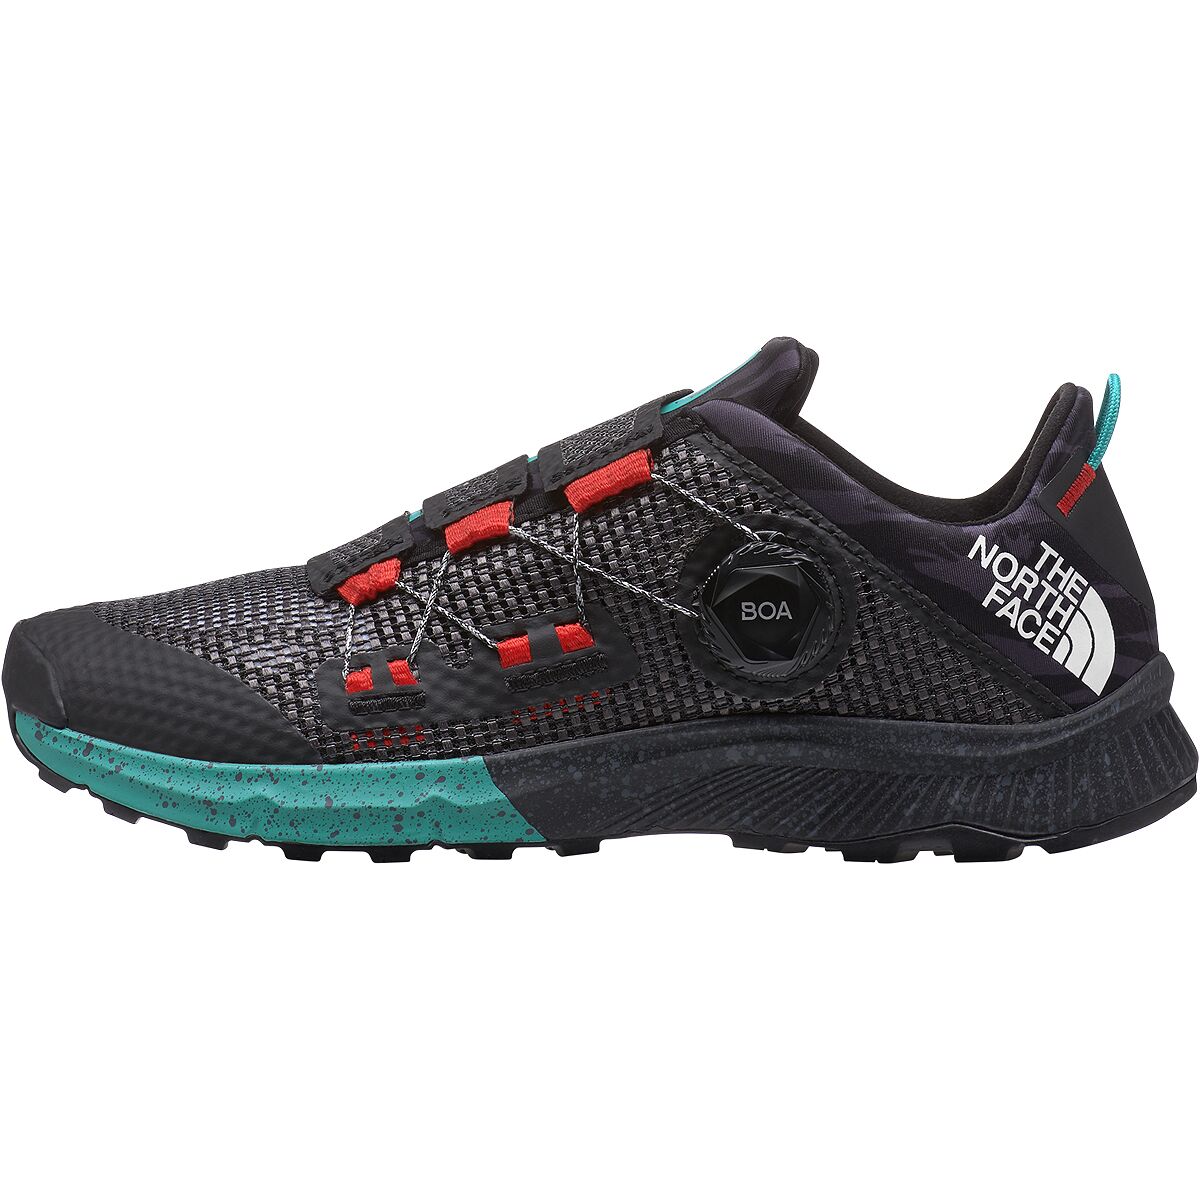 The North Face Summit Cragstone Pro Shoe - Women's